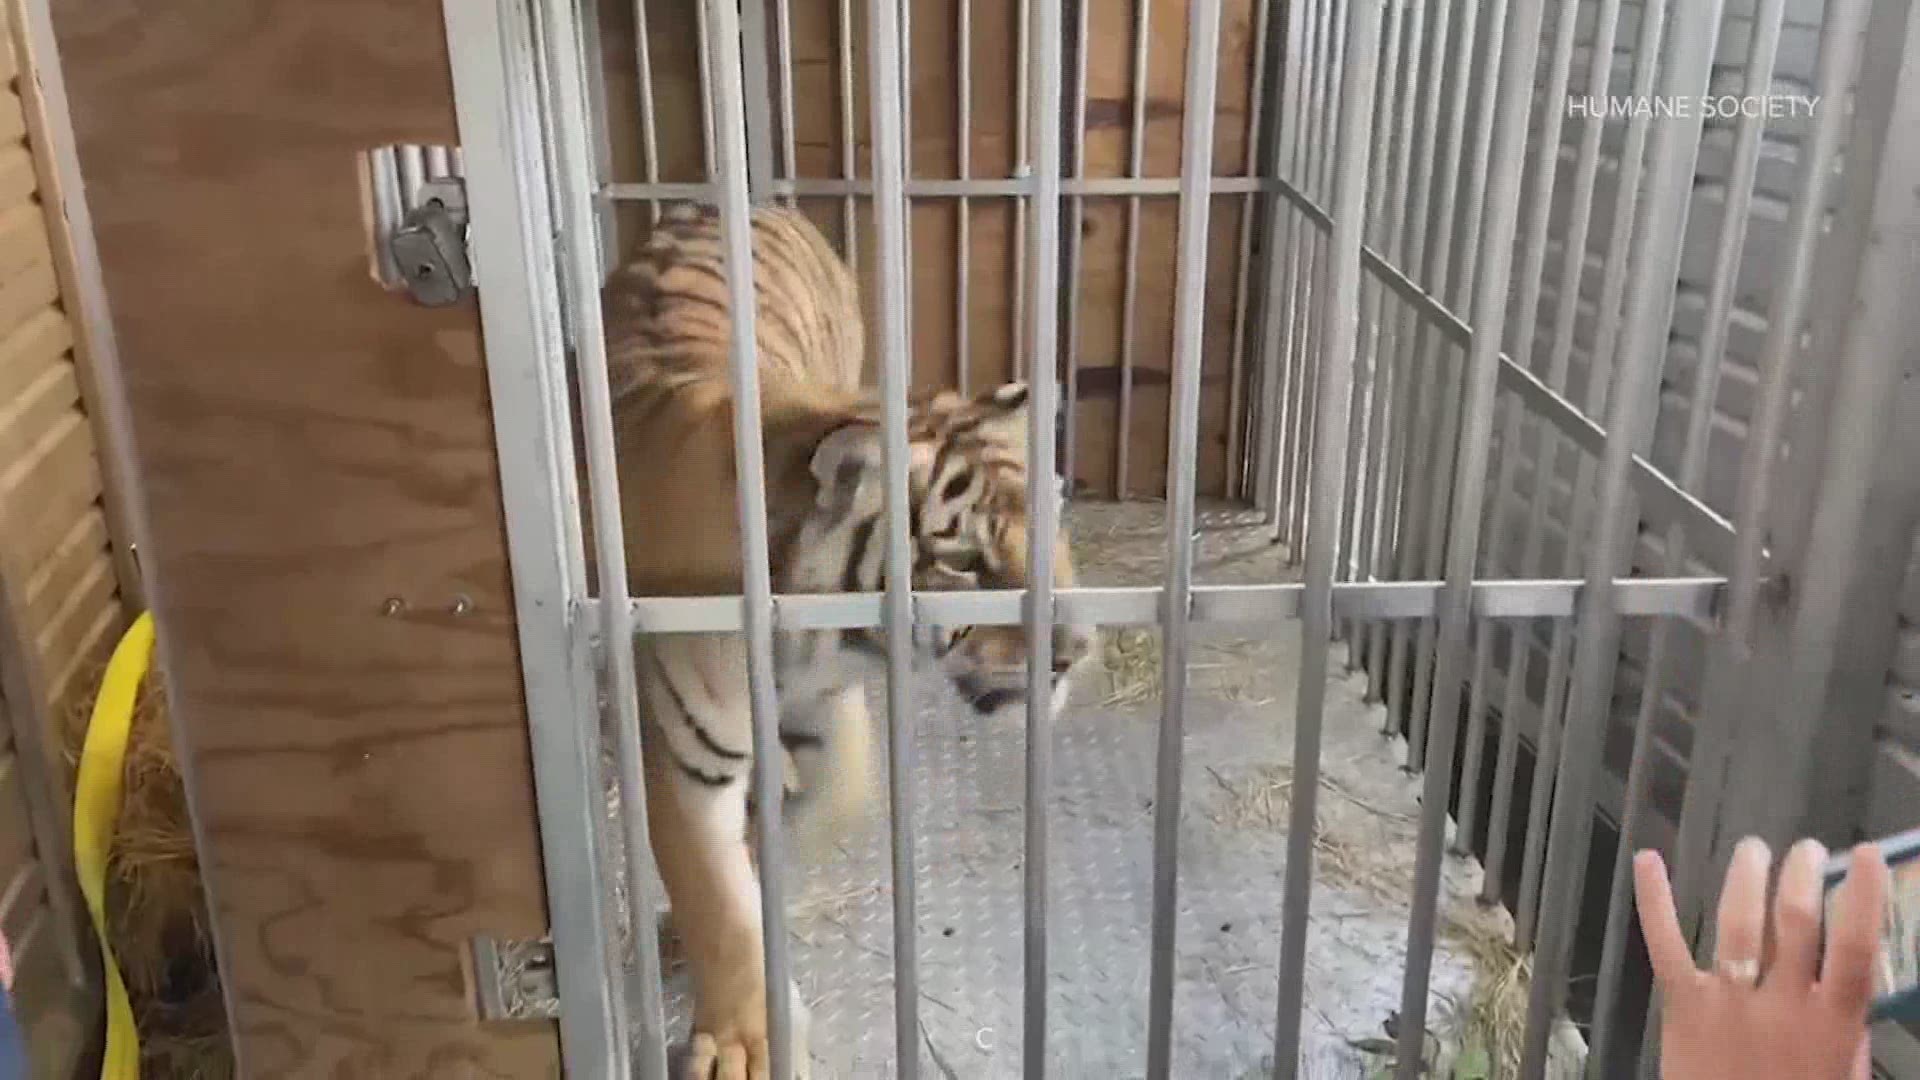 New details are emerging about how India the tiger was safely handed over to Houston’s animal control over the weekend.